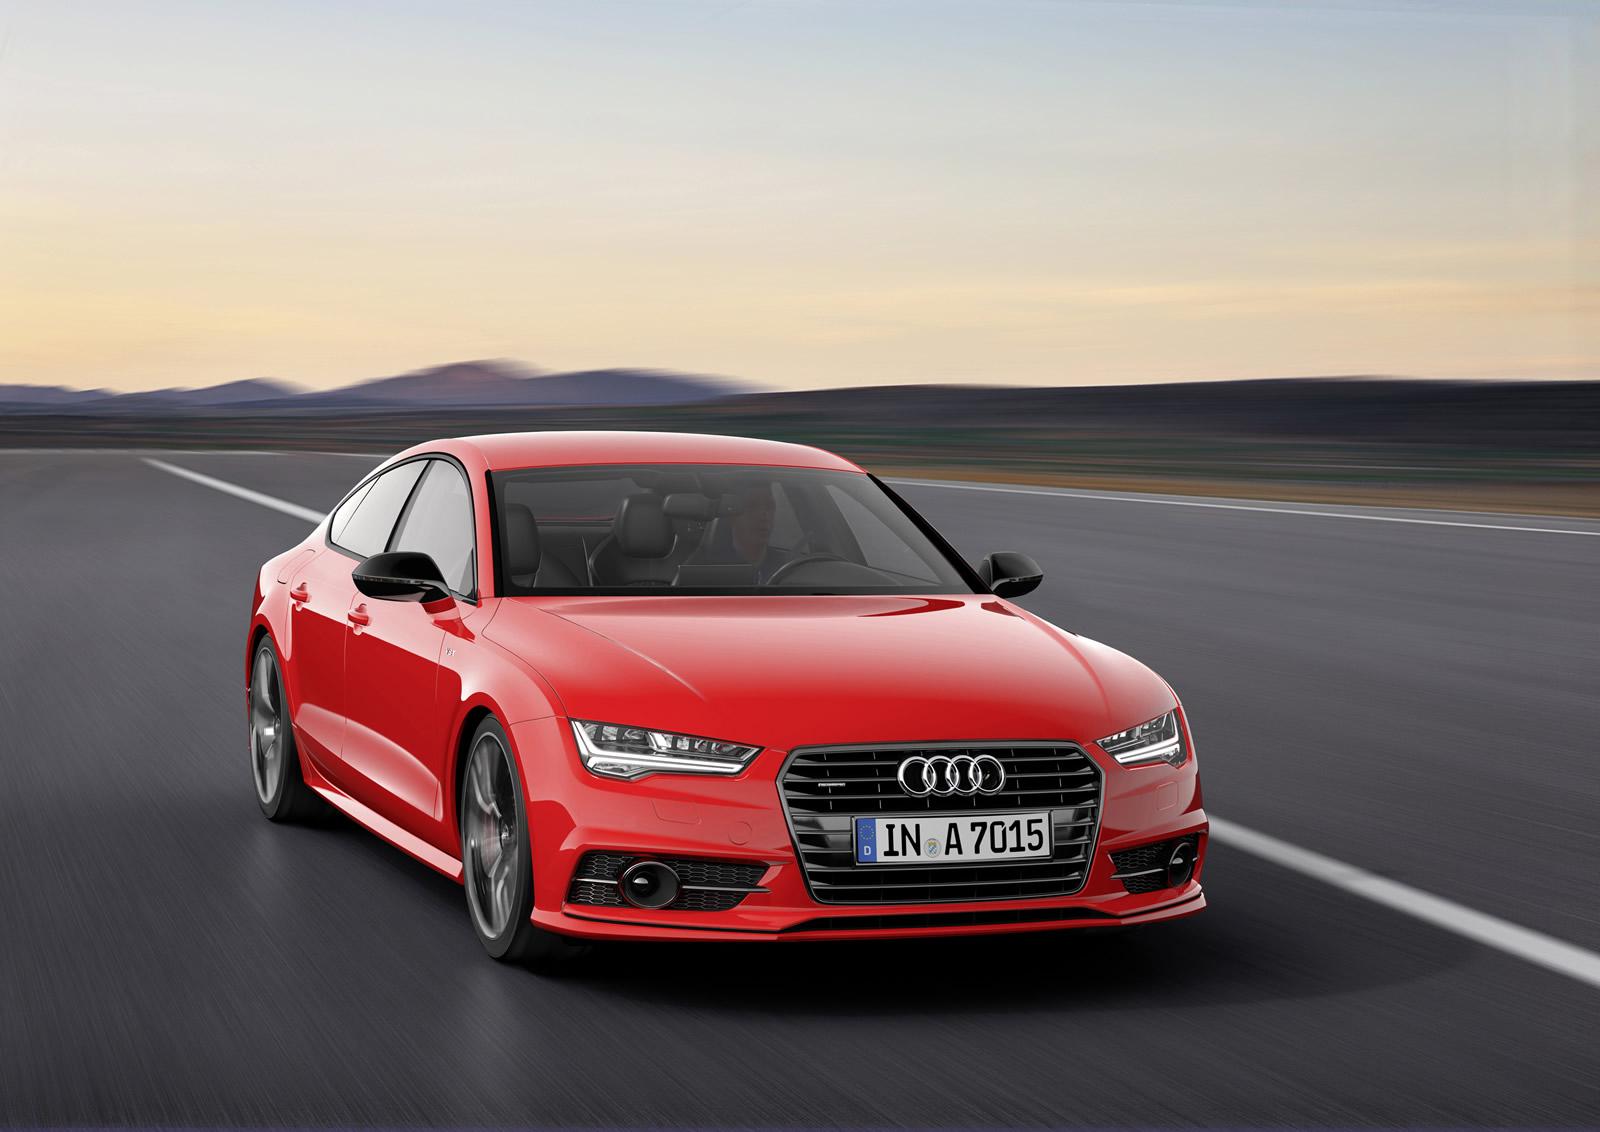 faktor vrede Kvadrant New Audi A7 Sportback 3.0 TDI competition Packs 326 HP of Diesel Power -  autoevolution